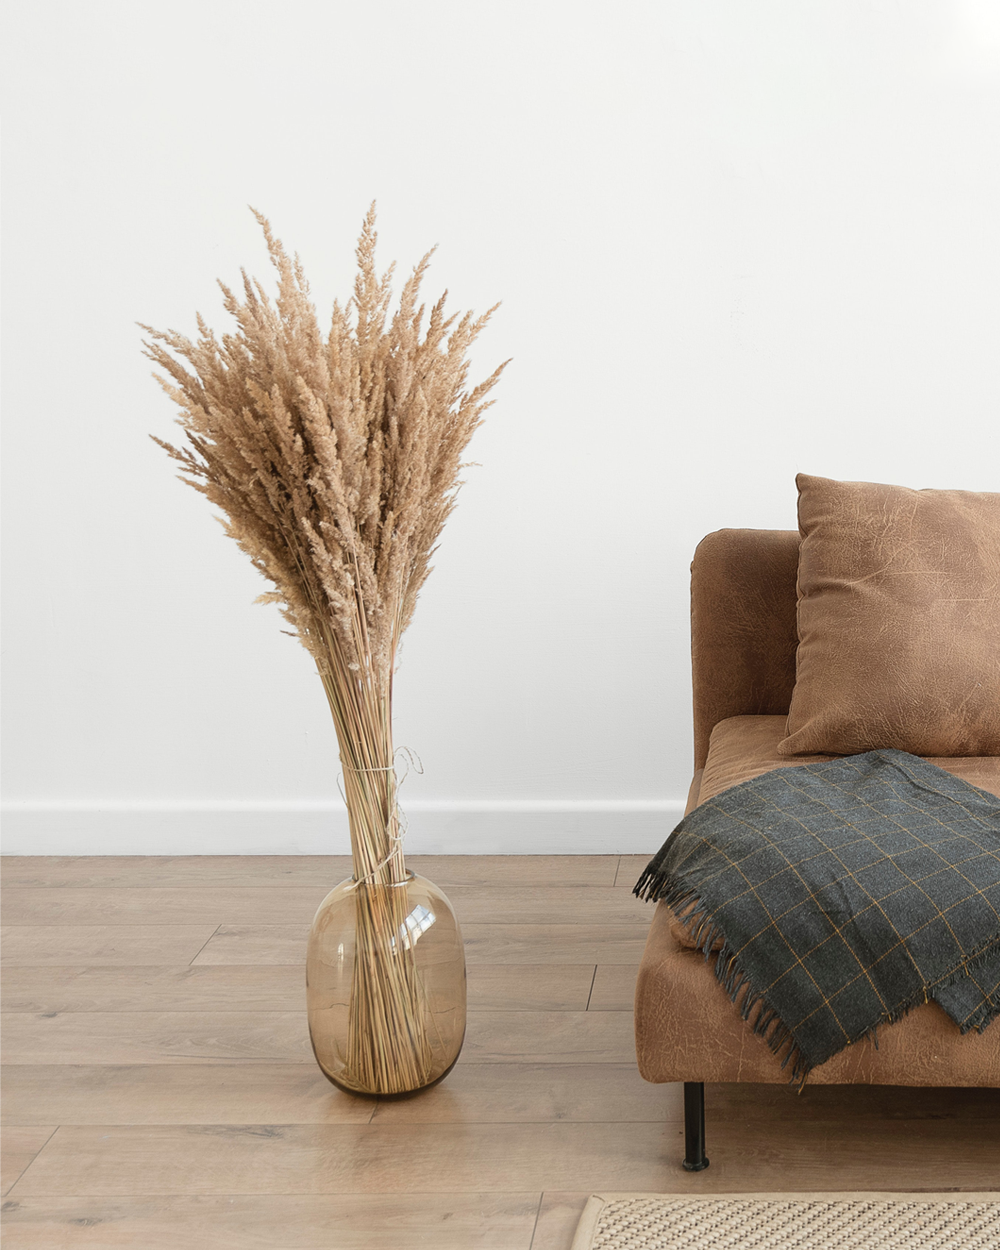 Pampas Grass is the hottest home decor trend of 2021